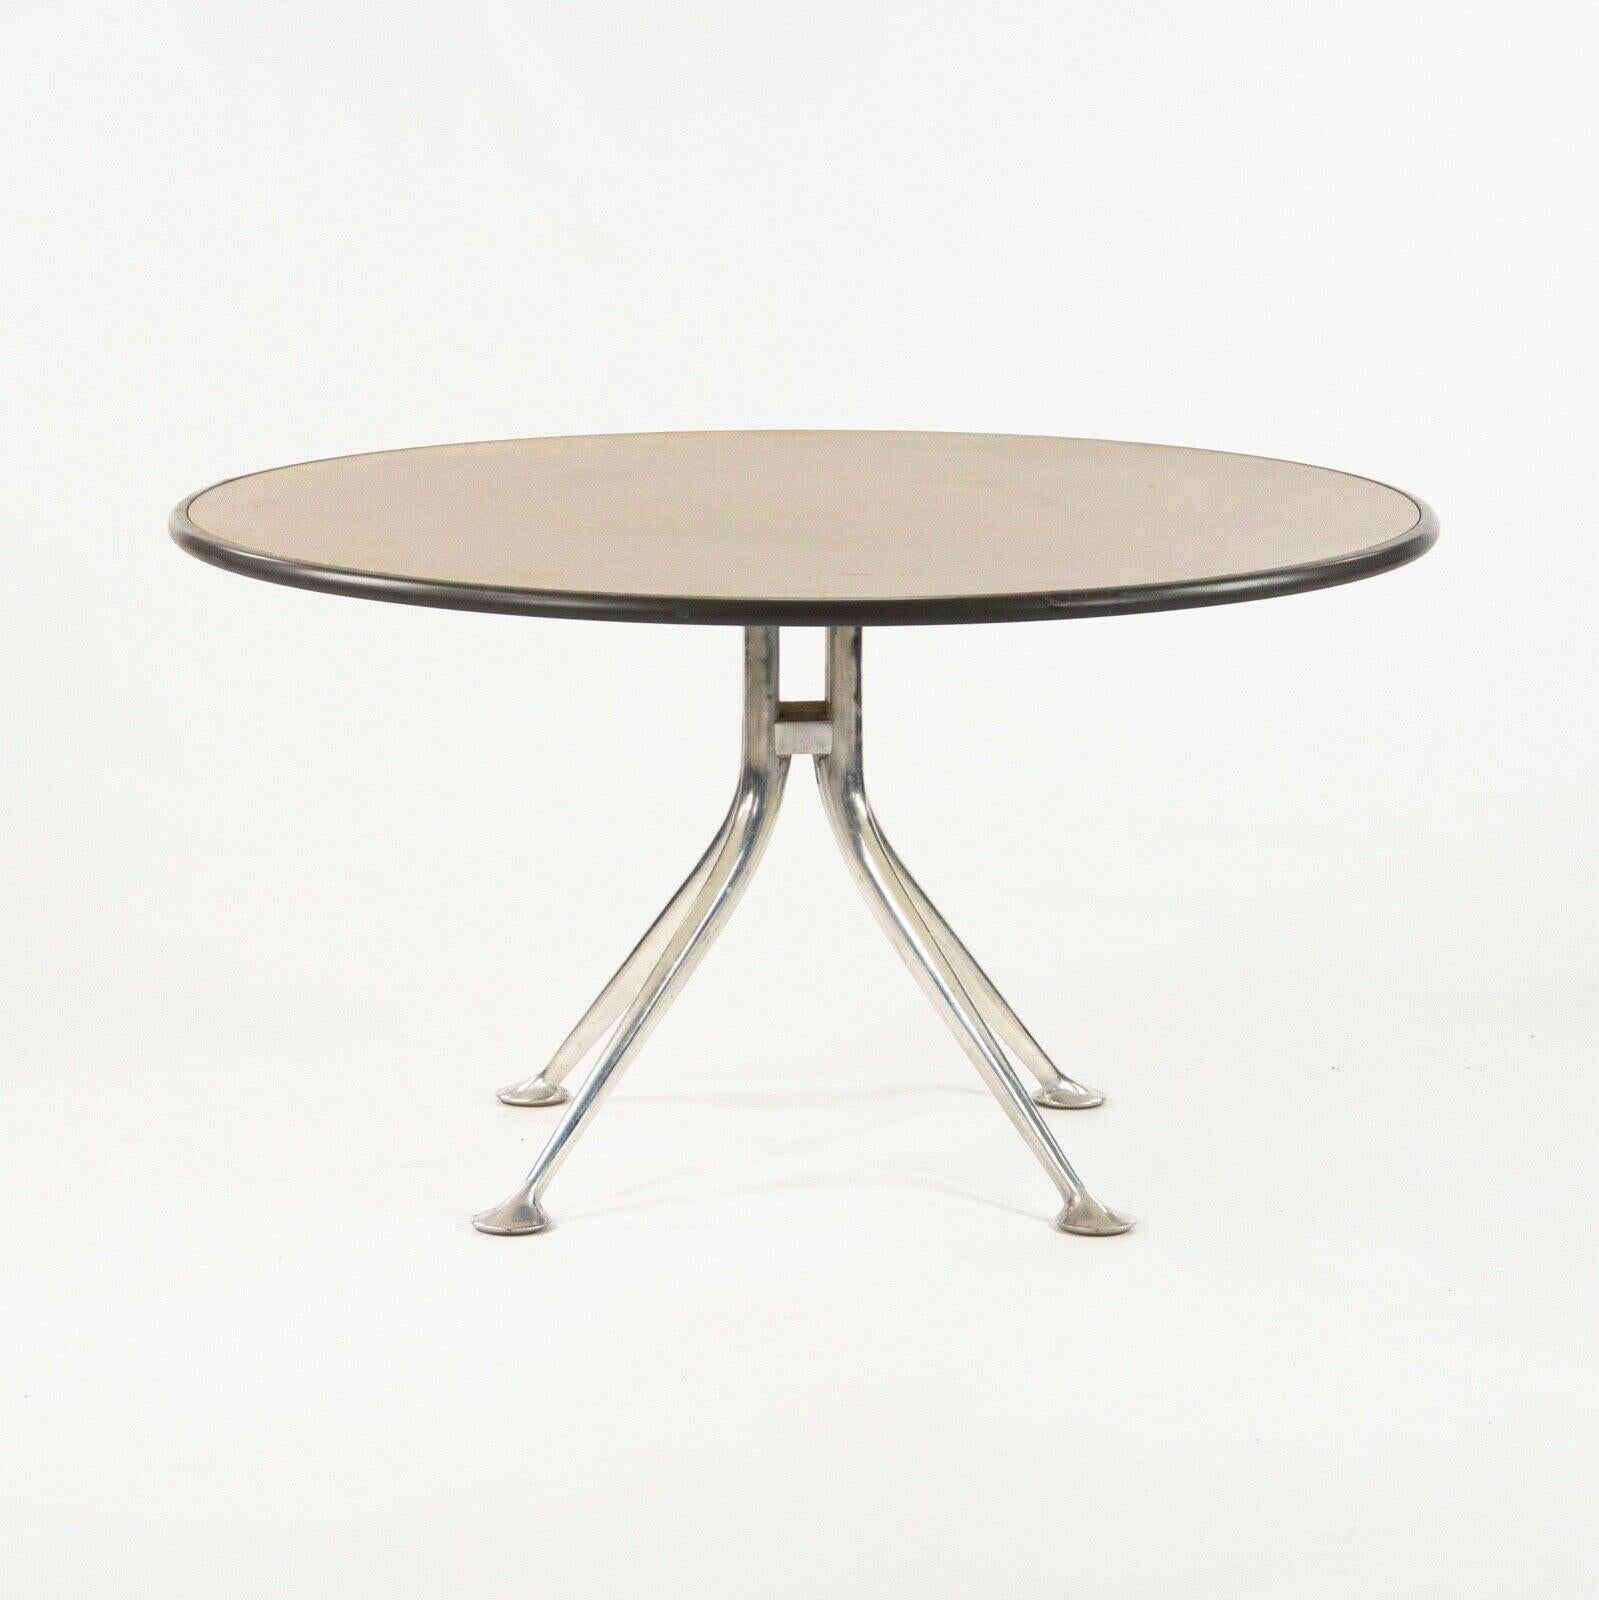 Listed for sale is an exceptionally rare coffee table designed by renowned designers Alexander Girard, Ray Eames, and Charles Eames. This design was part of a table collection, which was worked on collaboratively between the Eames' and Alexander